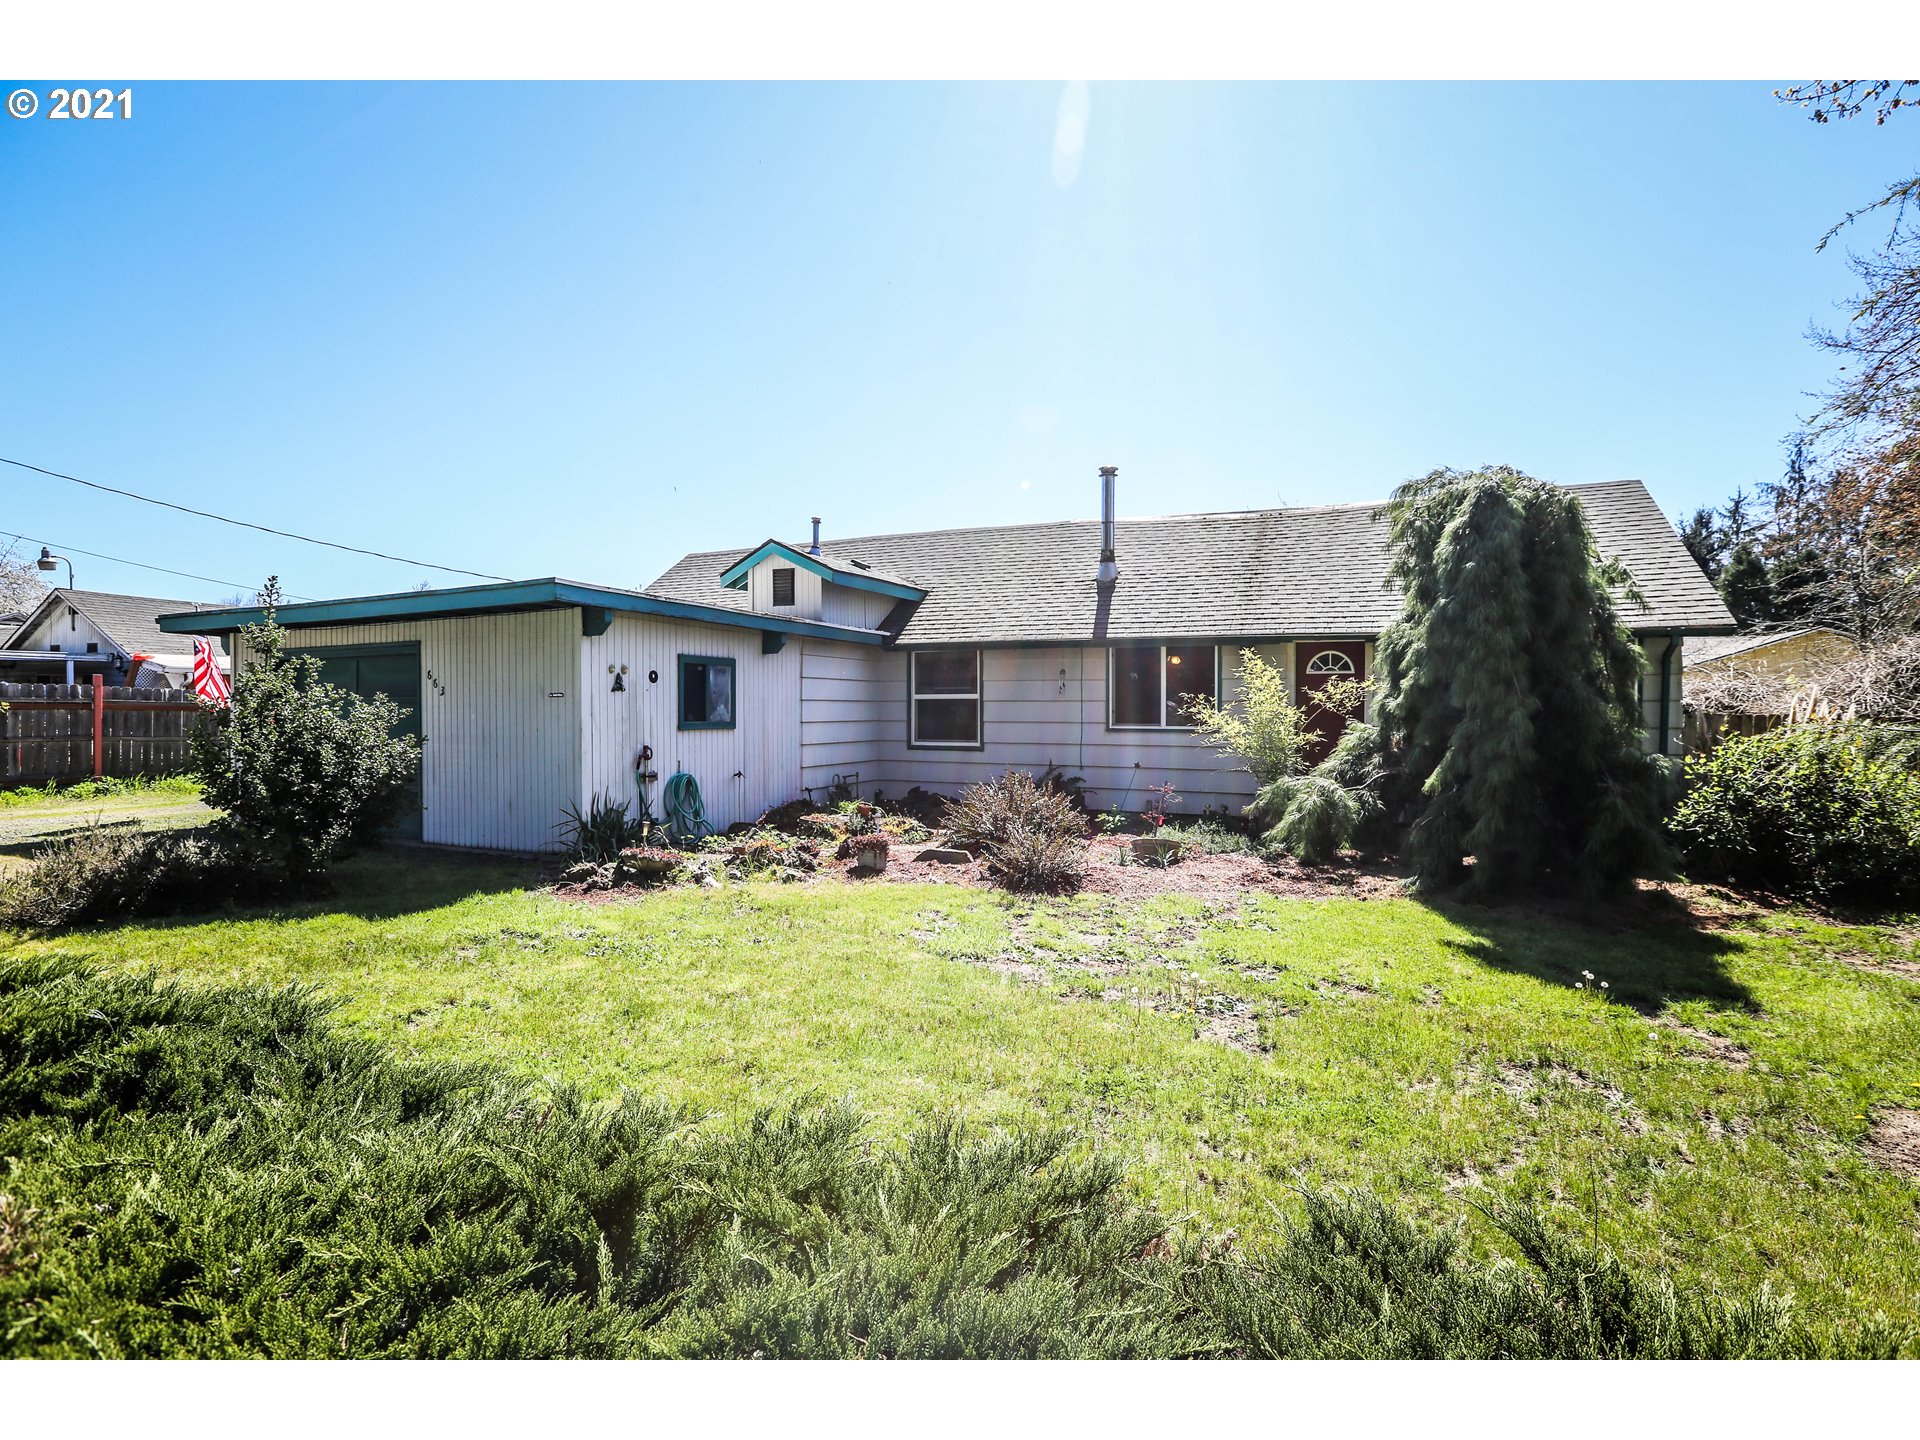 663 FAIRVIEW DR (1 of 21)